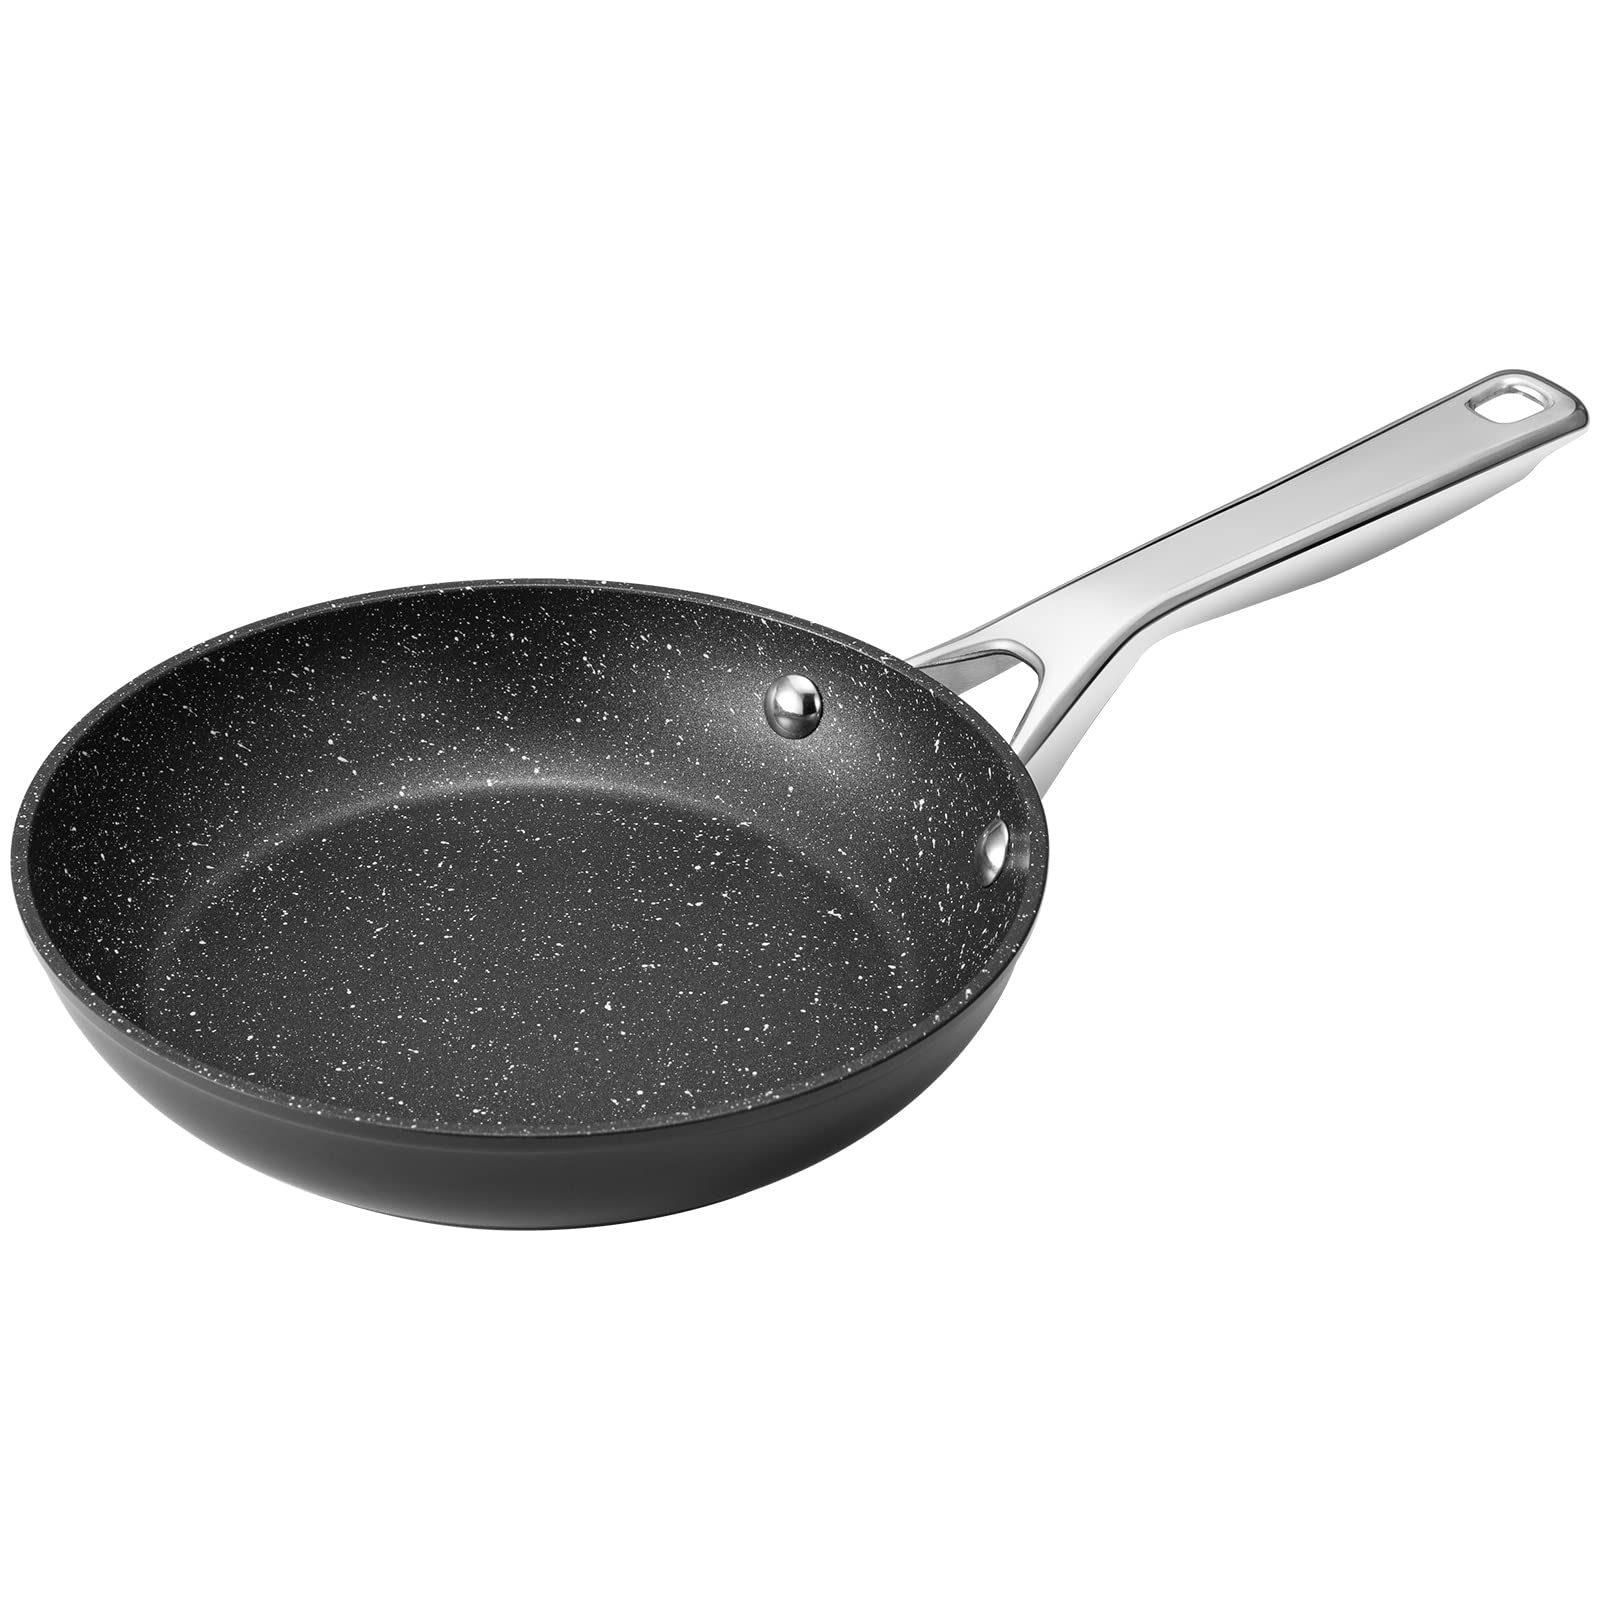 Fadware Small Frying Pan 20cm